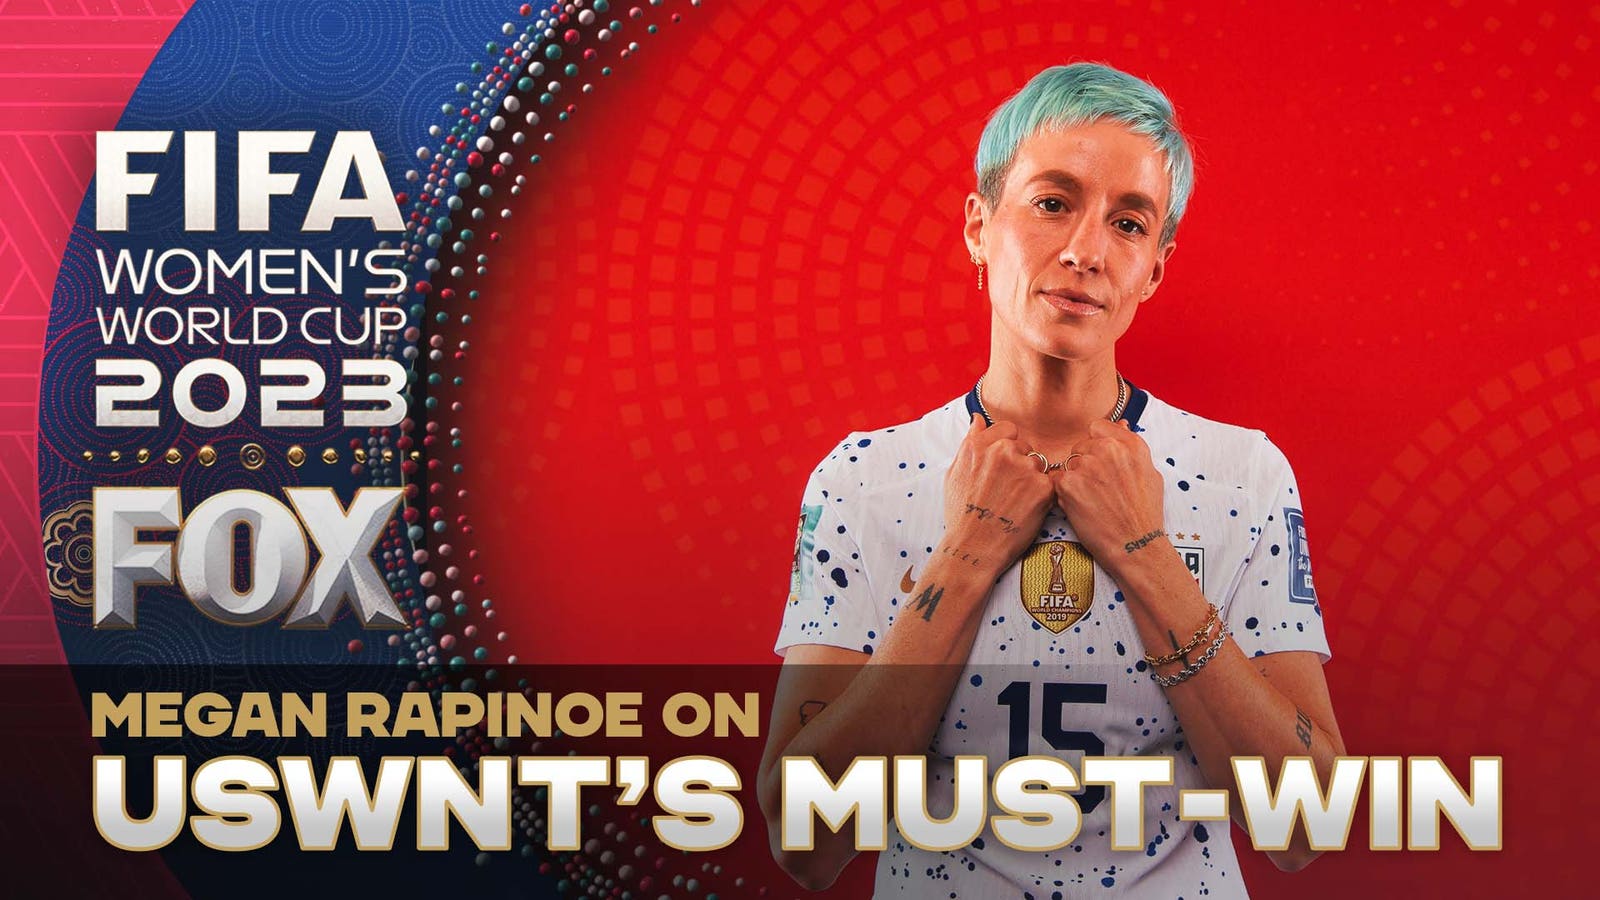 "This is what you train for" — Megan Rapinoe on the game vs. Portugal